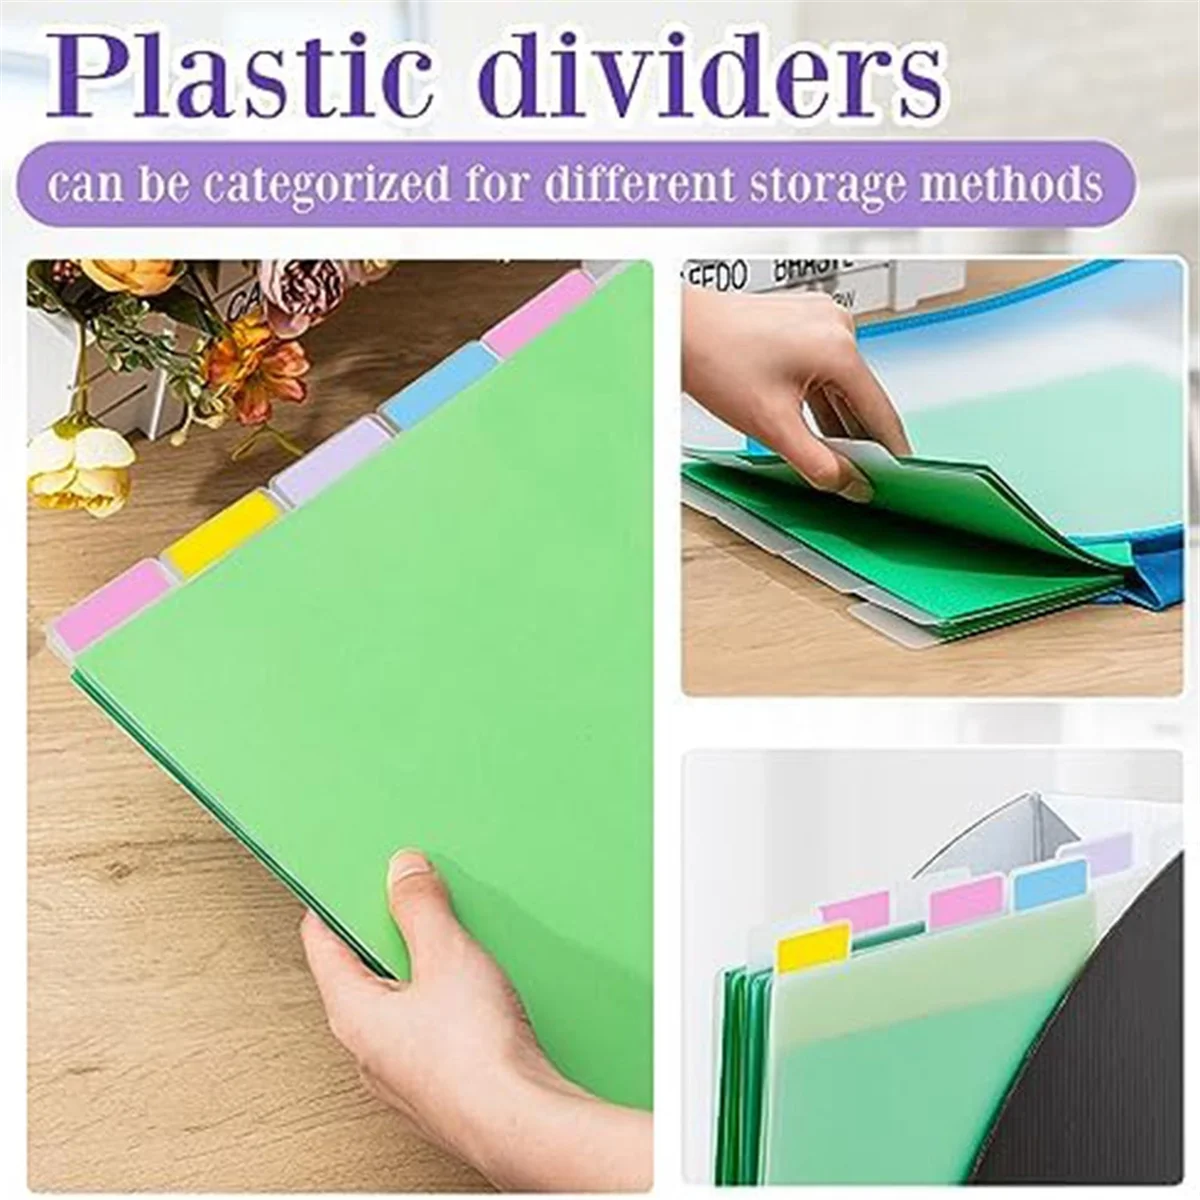 Scrapbook Paper Dividers for Dividing, Scrapbook Paper Storage, Cardstock, Table Dividers, File, Library A, 12x12 in